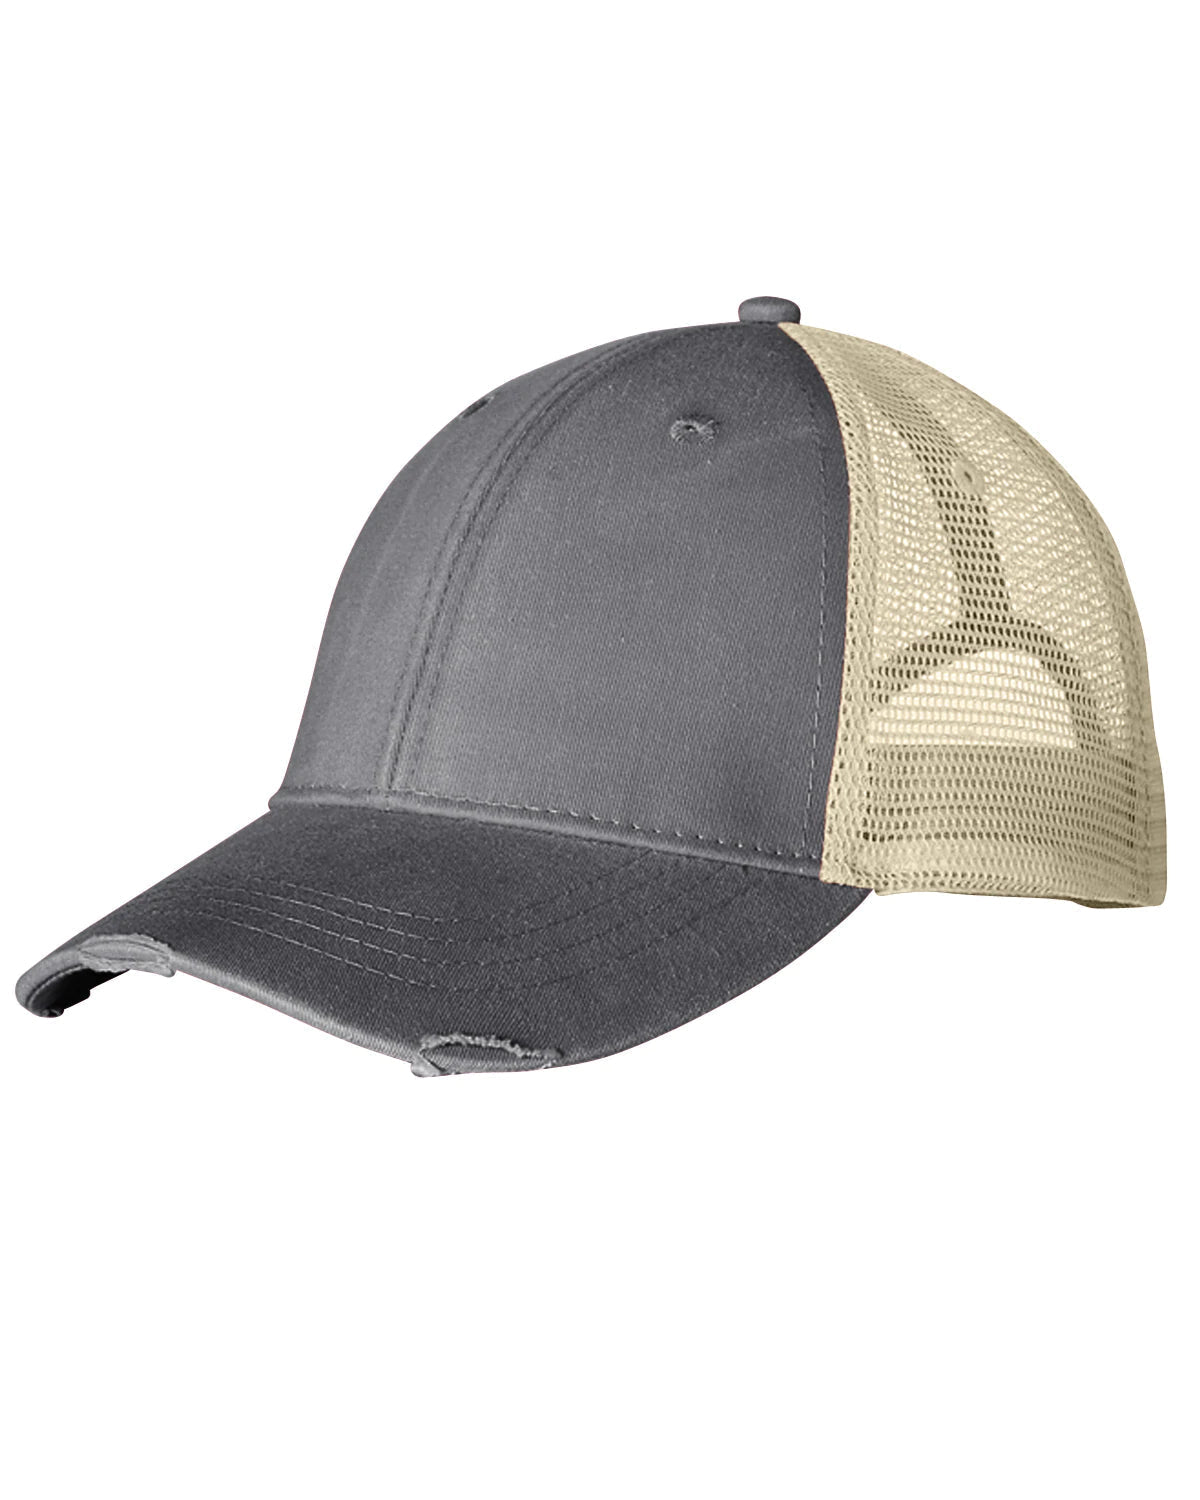 Jesus Highway To Heaven Leather Patch Hat -Multi Style